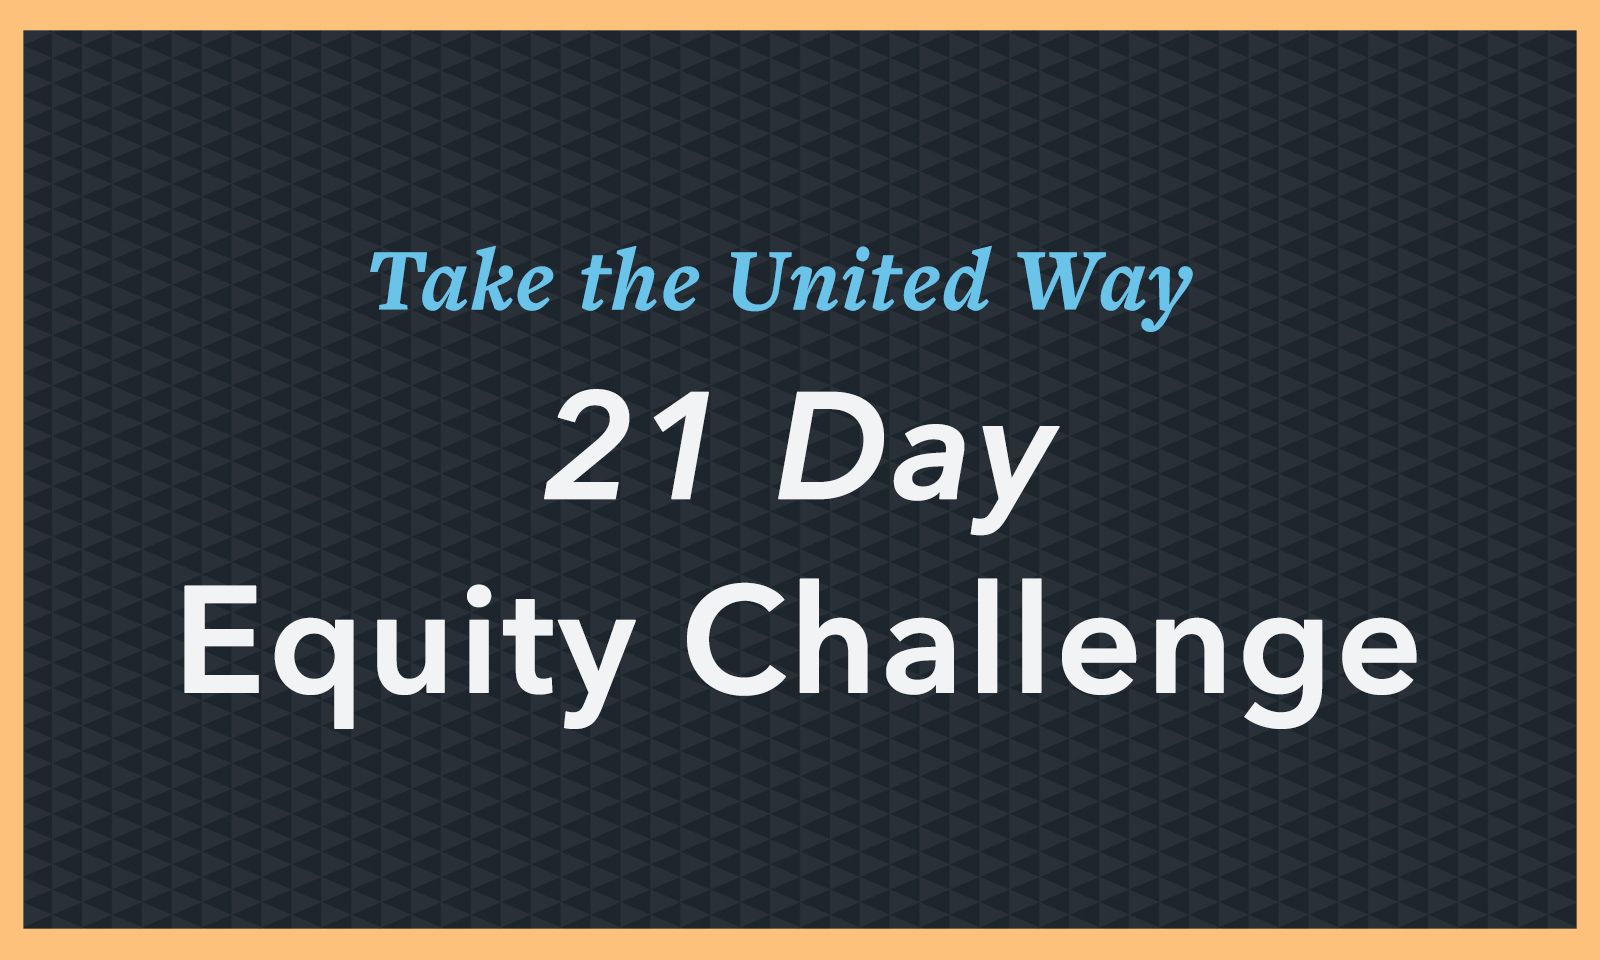 Join Alaant and Take the United Way - 21 Day Equity Challenge